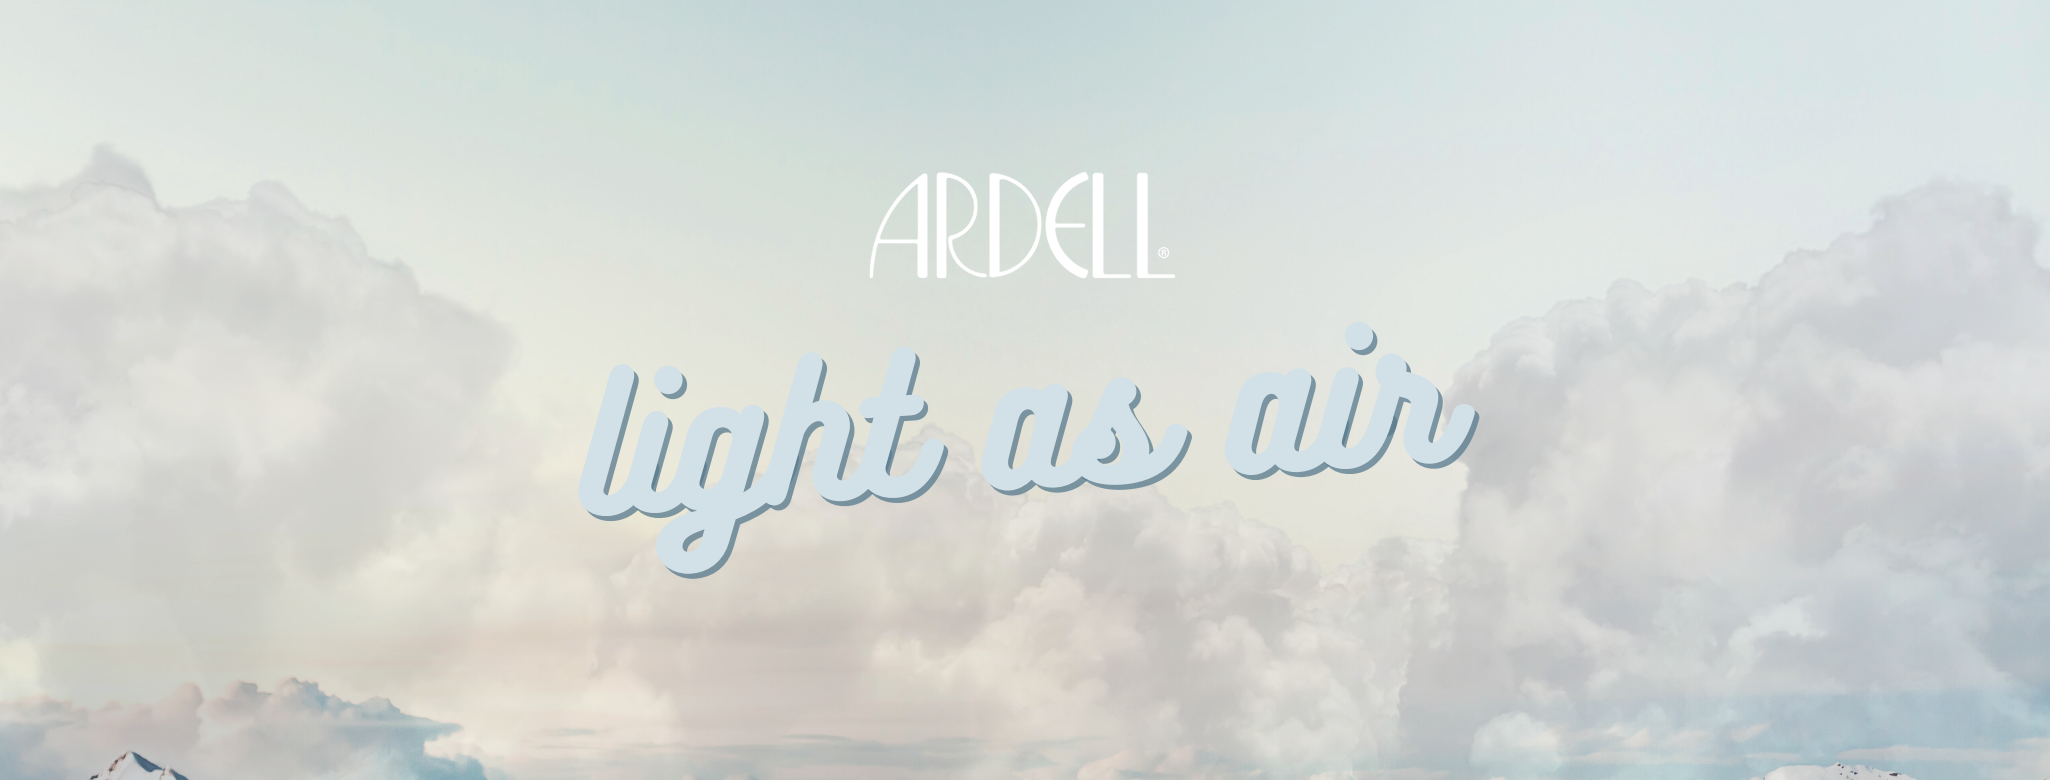 Ardell Lights As Air